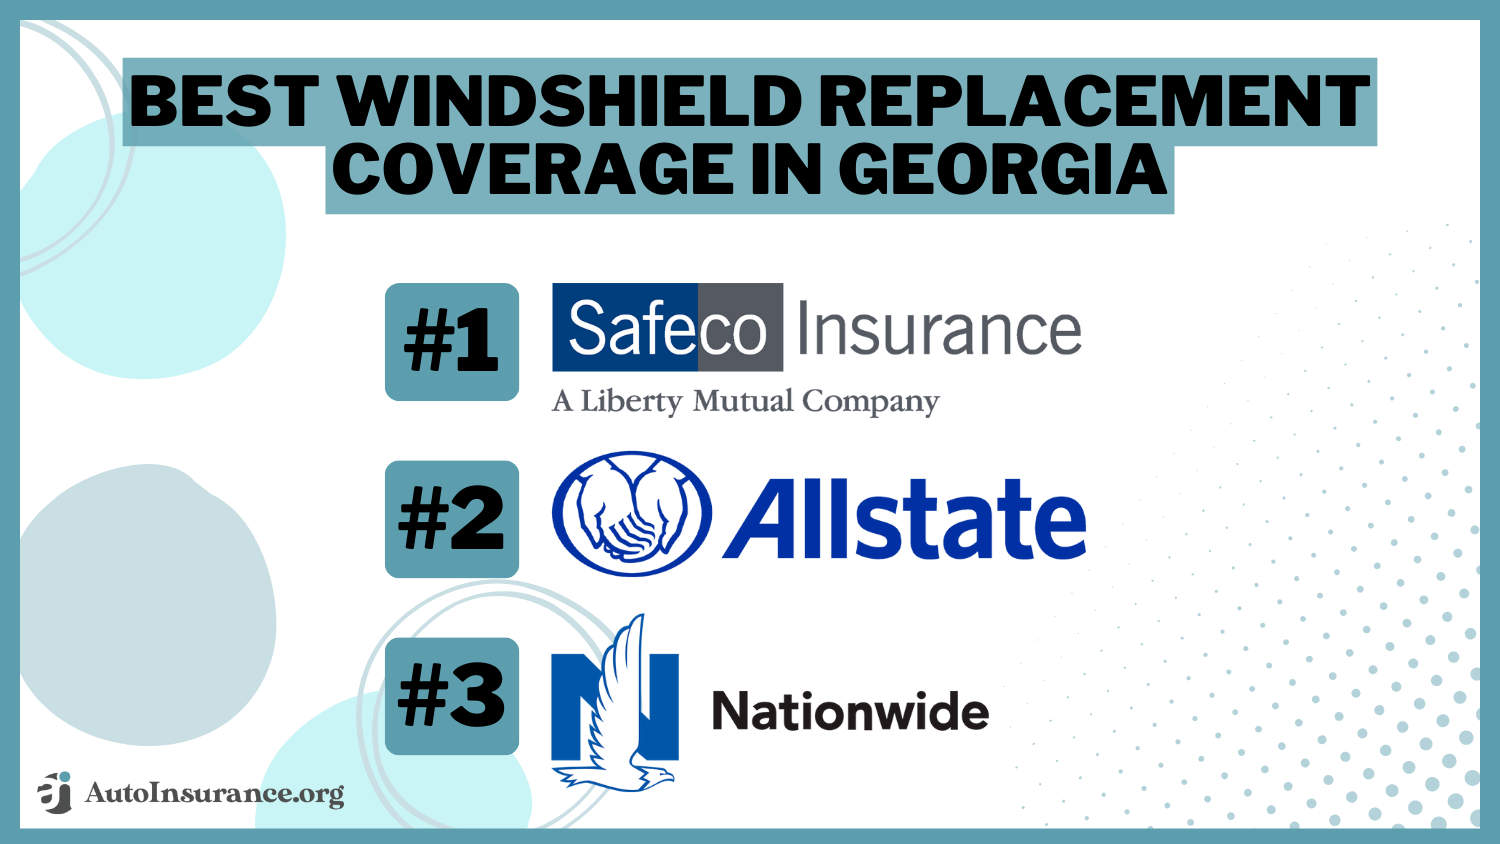 Best Windshield Replacement Coverage in Georgia: Safeco, Allstate, and Nationwide